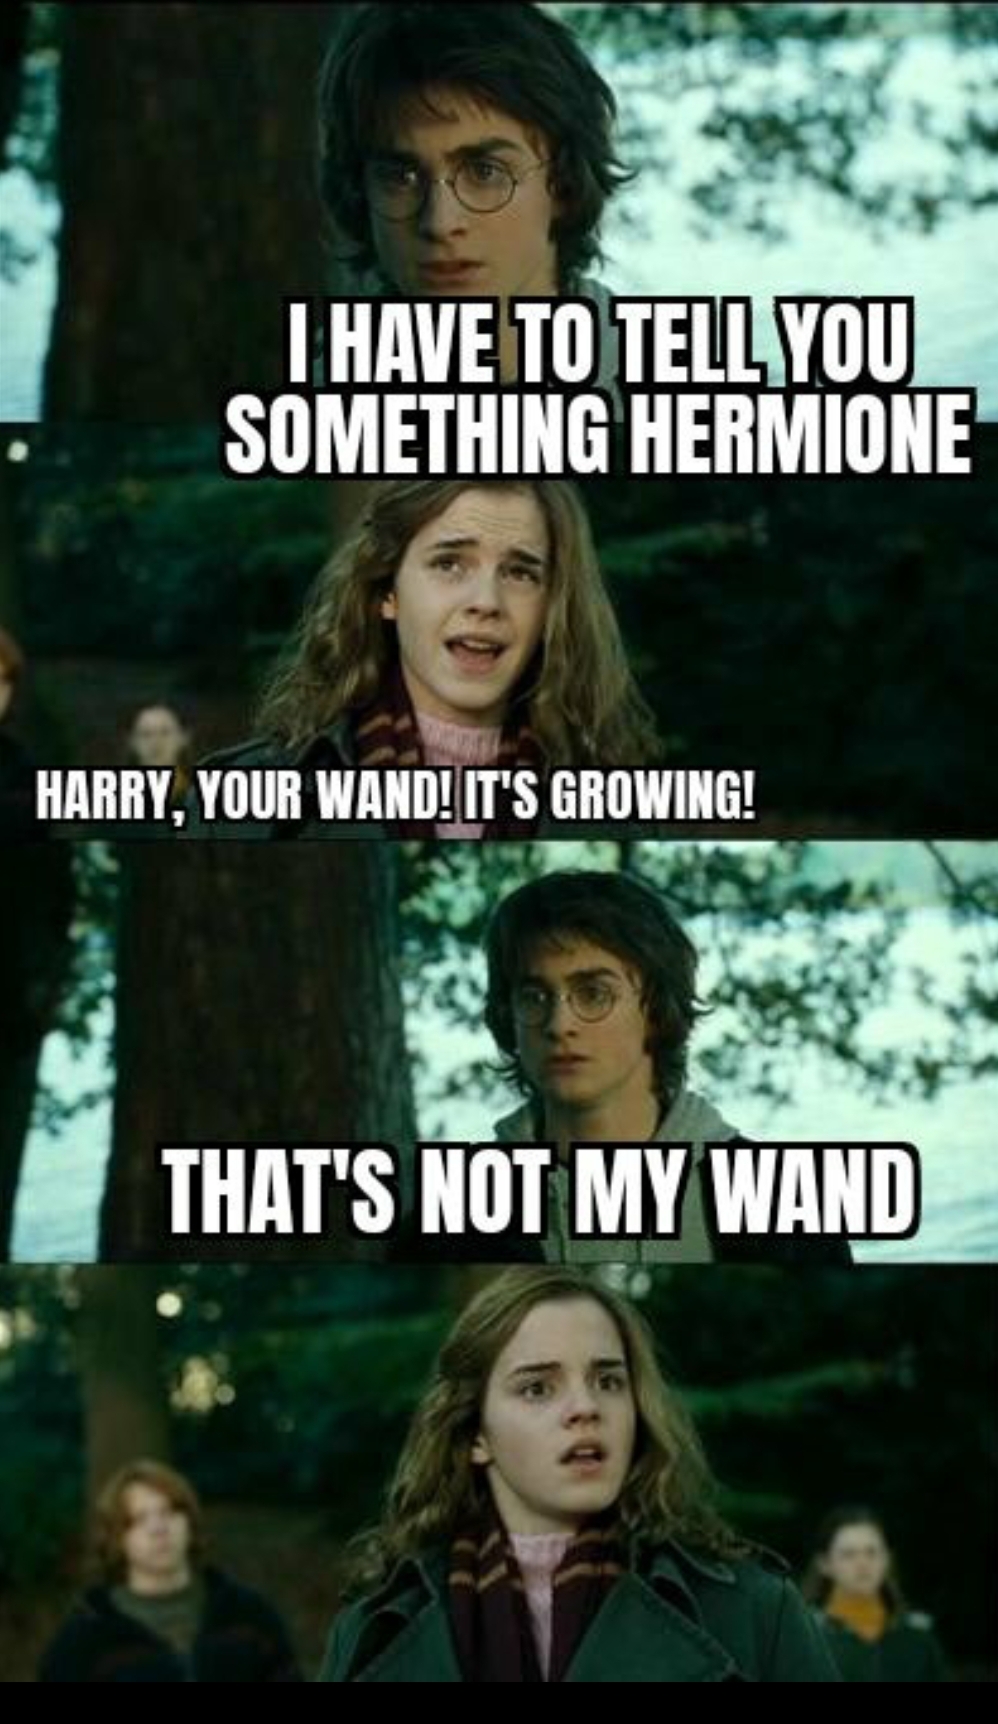 22 Of The Funniest Harry Potter Memes Ever Made